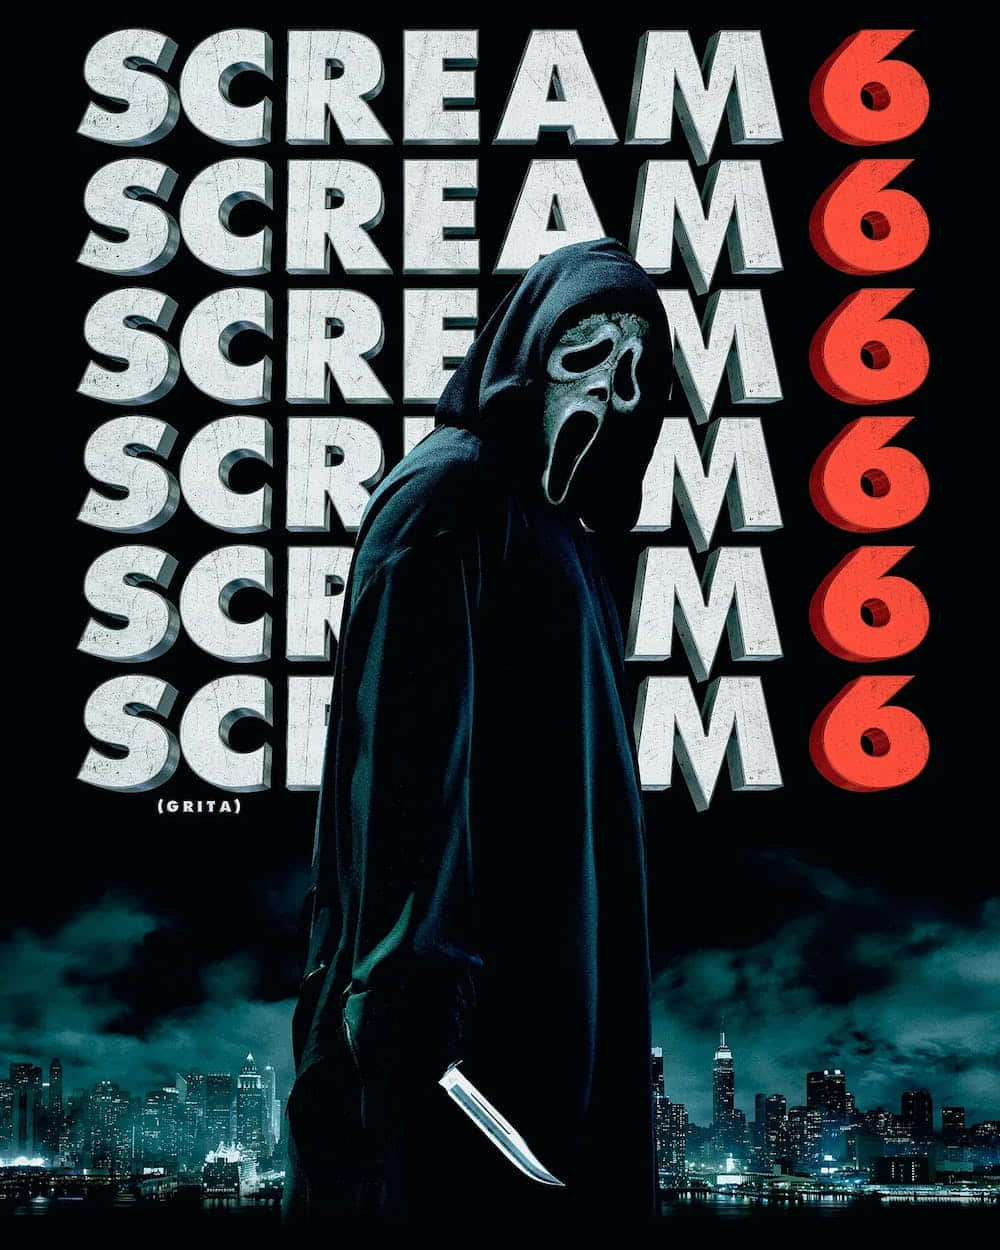 Seven Years After His Horrifying Debut, Ghostface Scream is Still Giving Us Nightmares